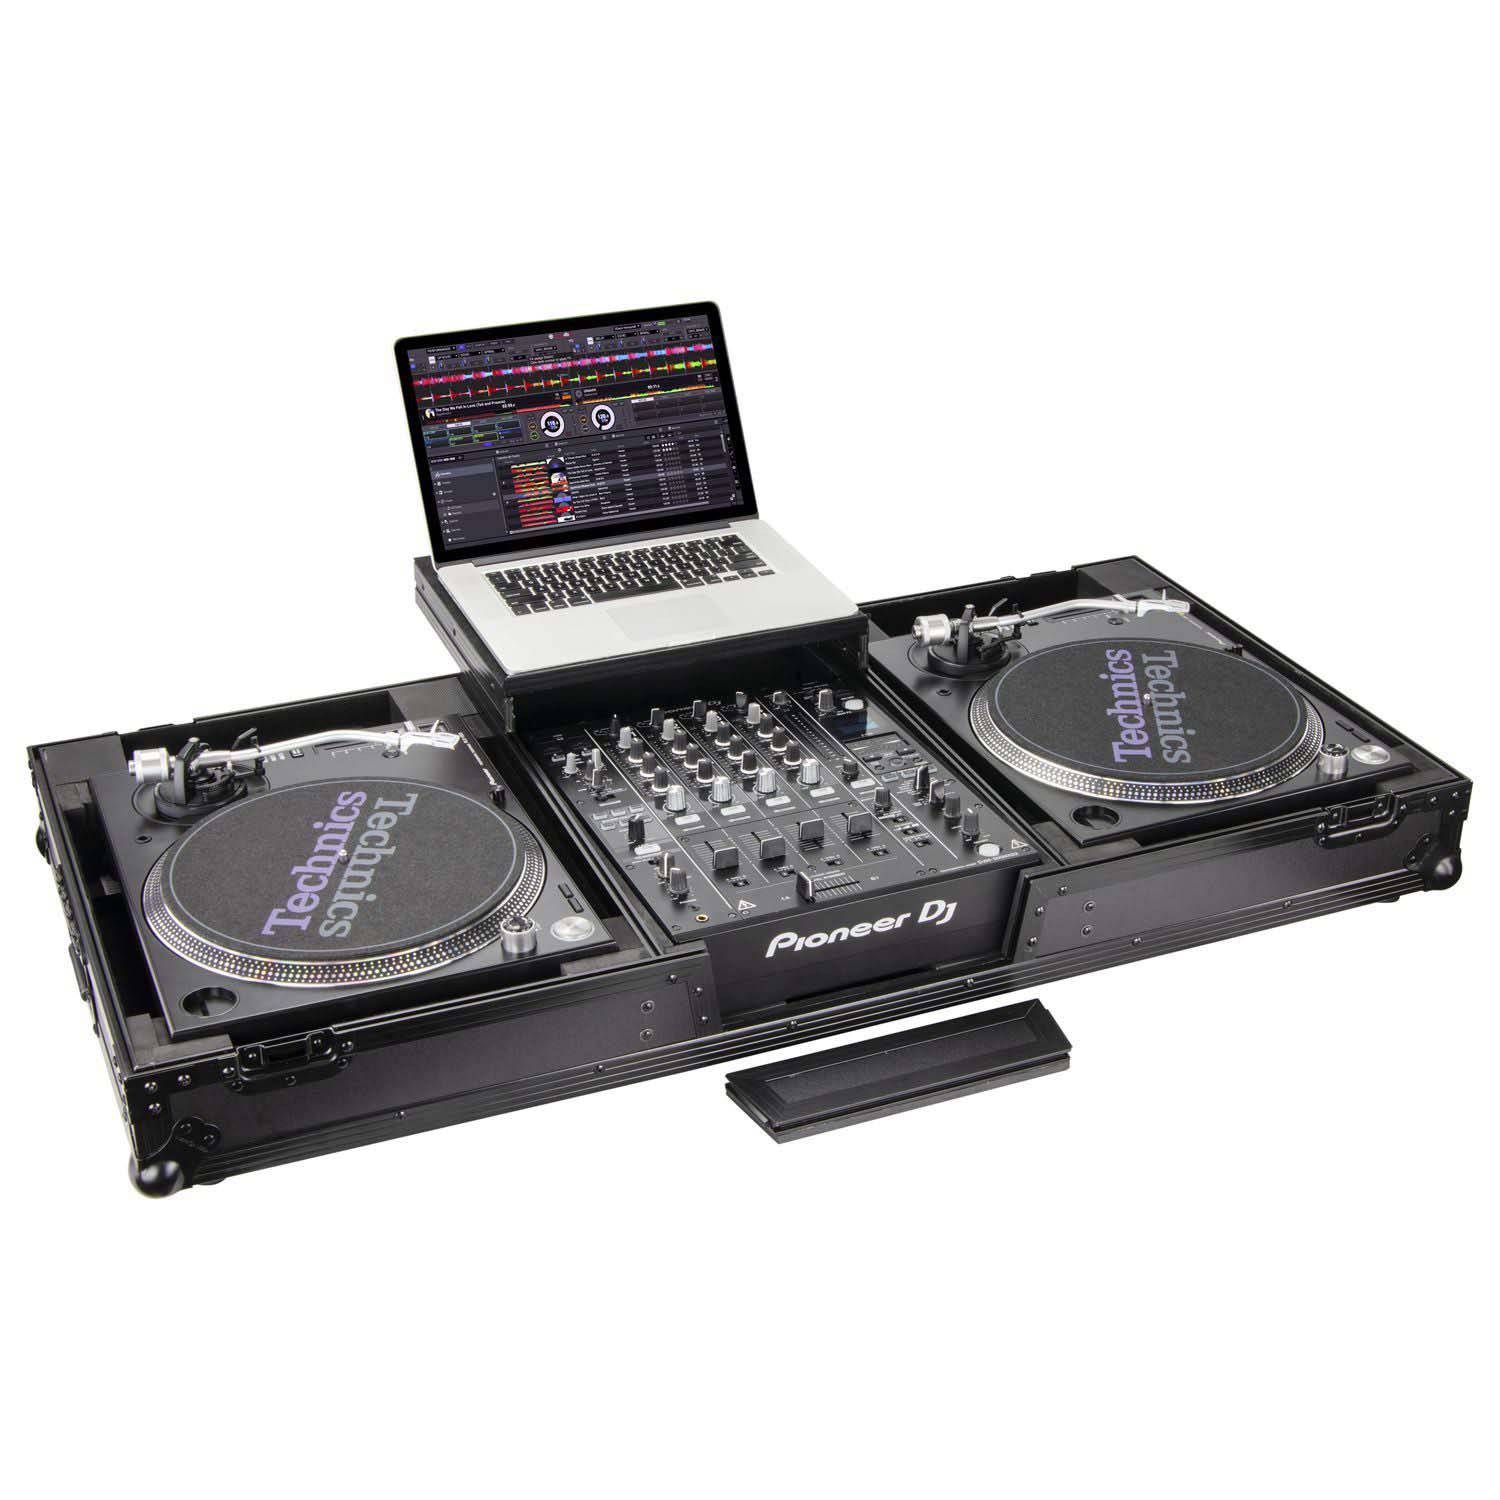 Odyssey FZGSLBM12WRBL Black Low Profile 12″ Format DJ Mixer and Two Battle Position Turntables Flight Coffin Case with Wheels and Glide Platform - Hollywood DJ